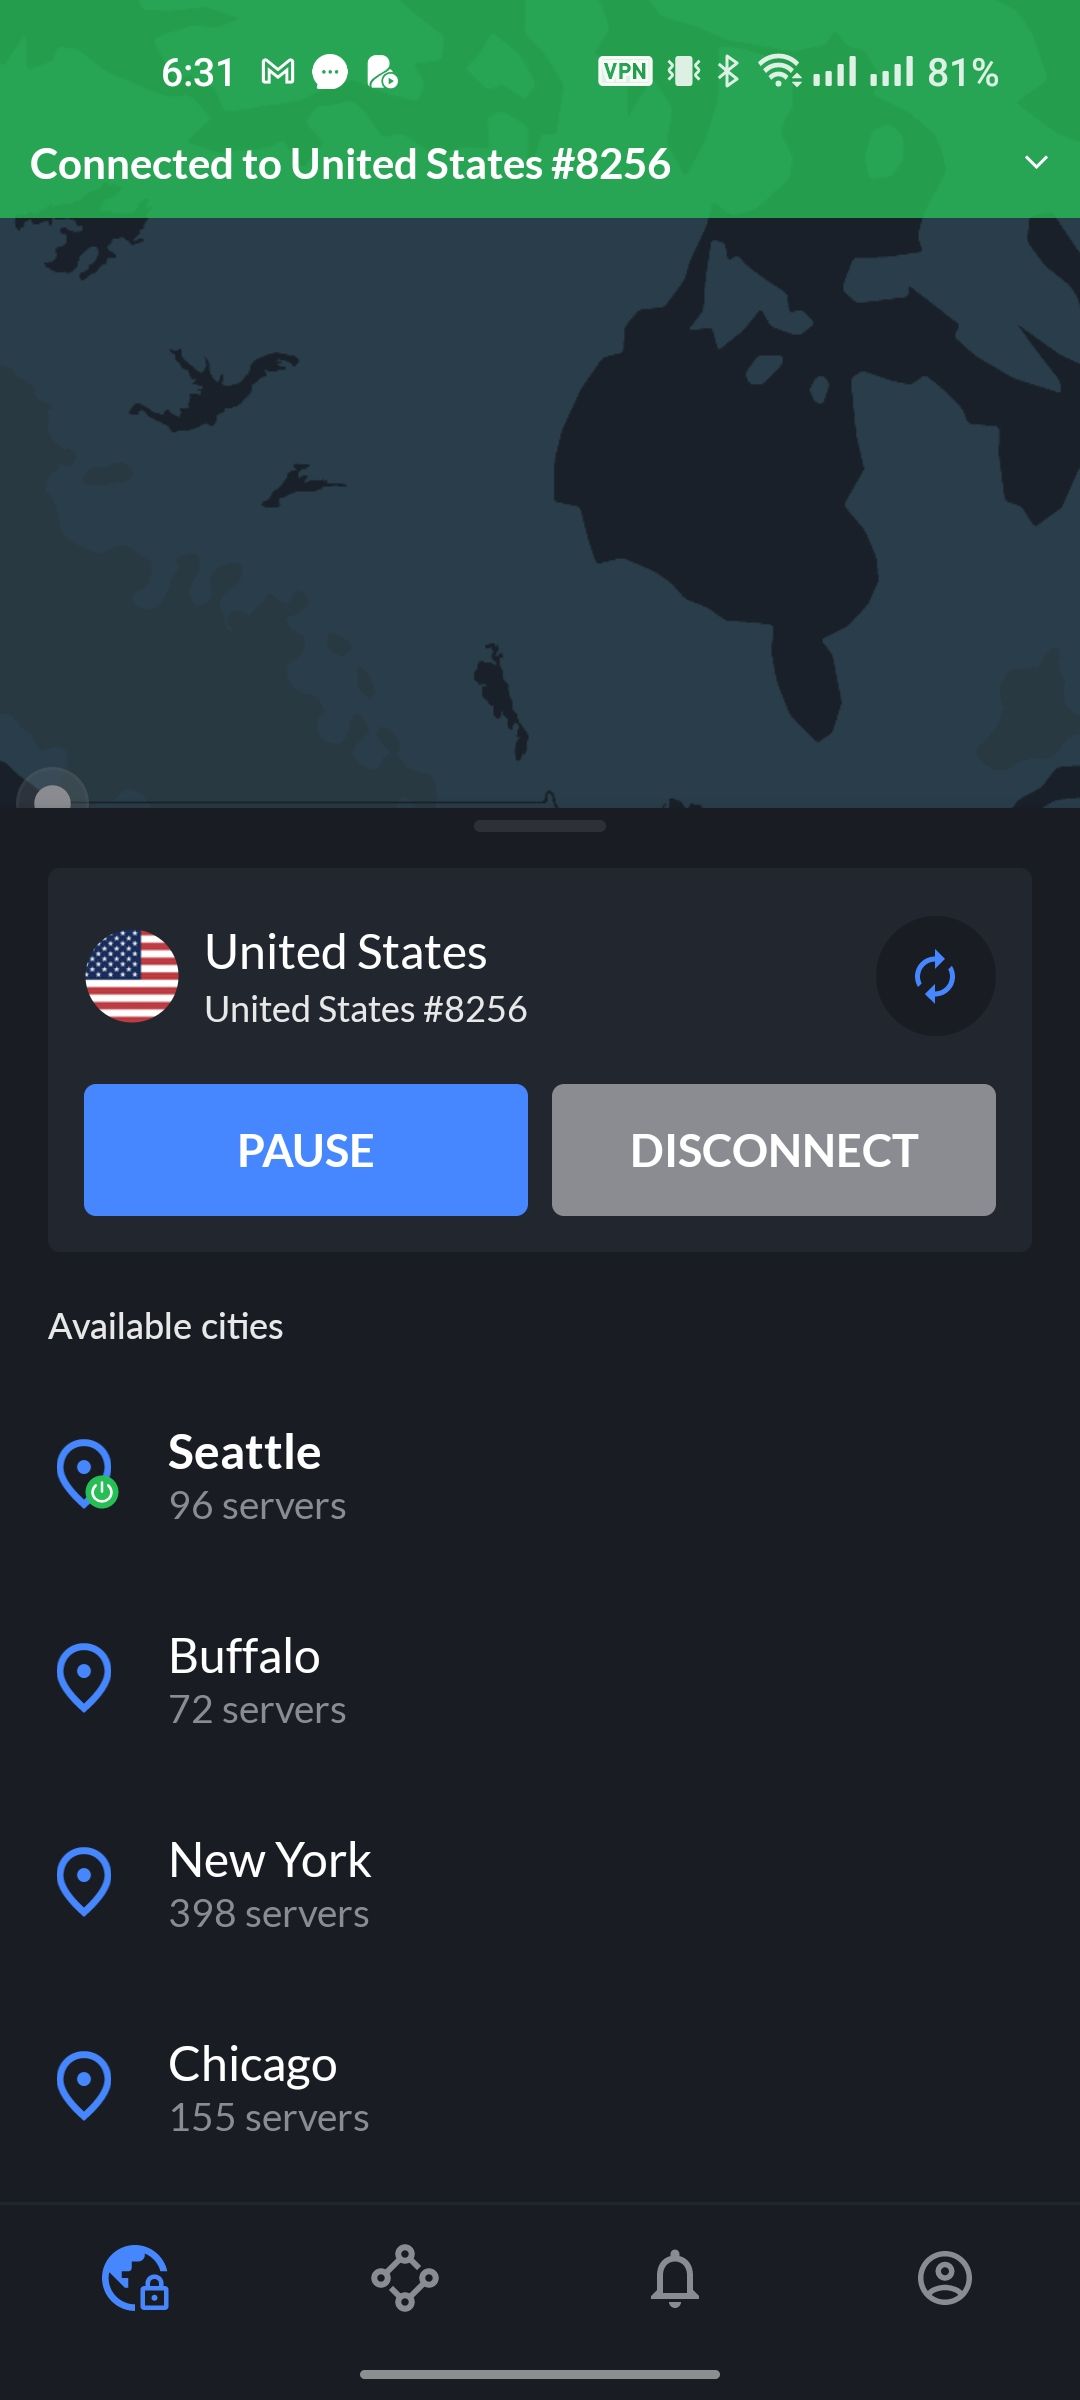 Available servers in different cities in the US on NordVPN